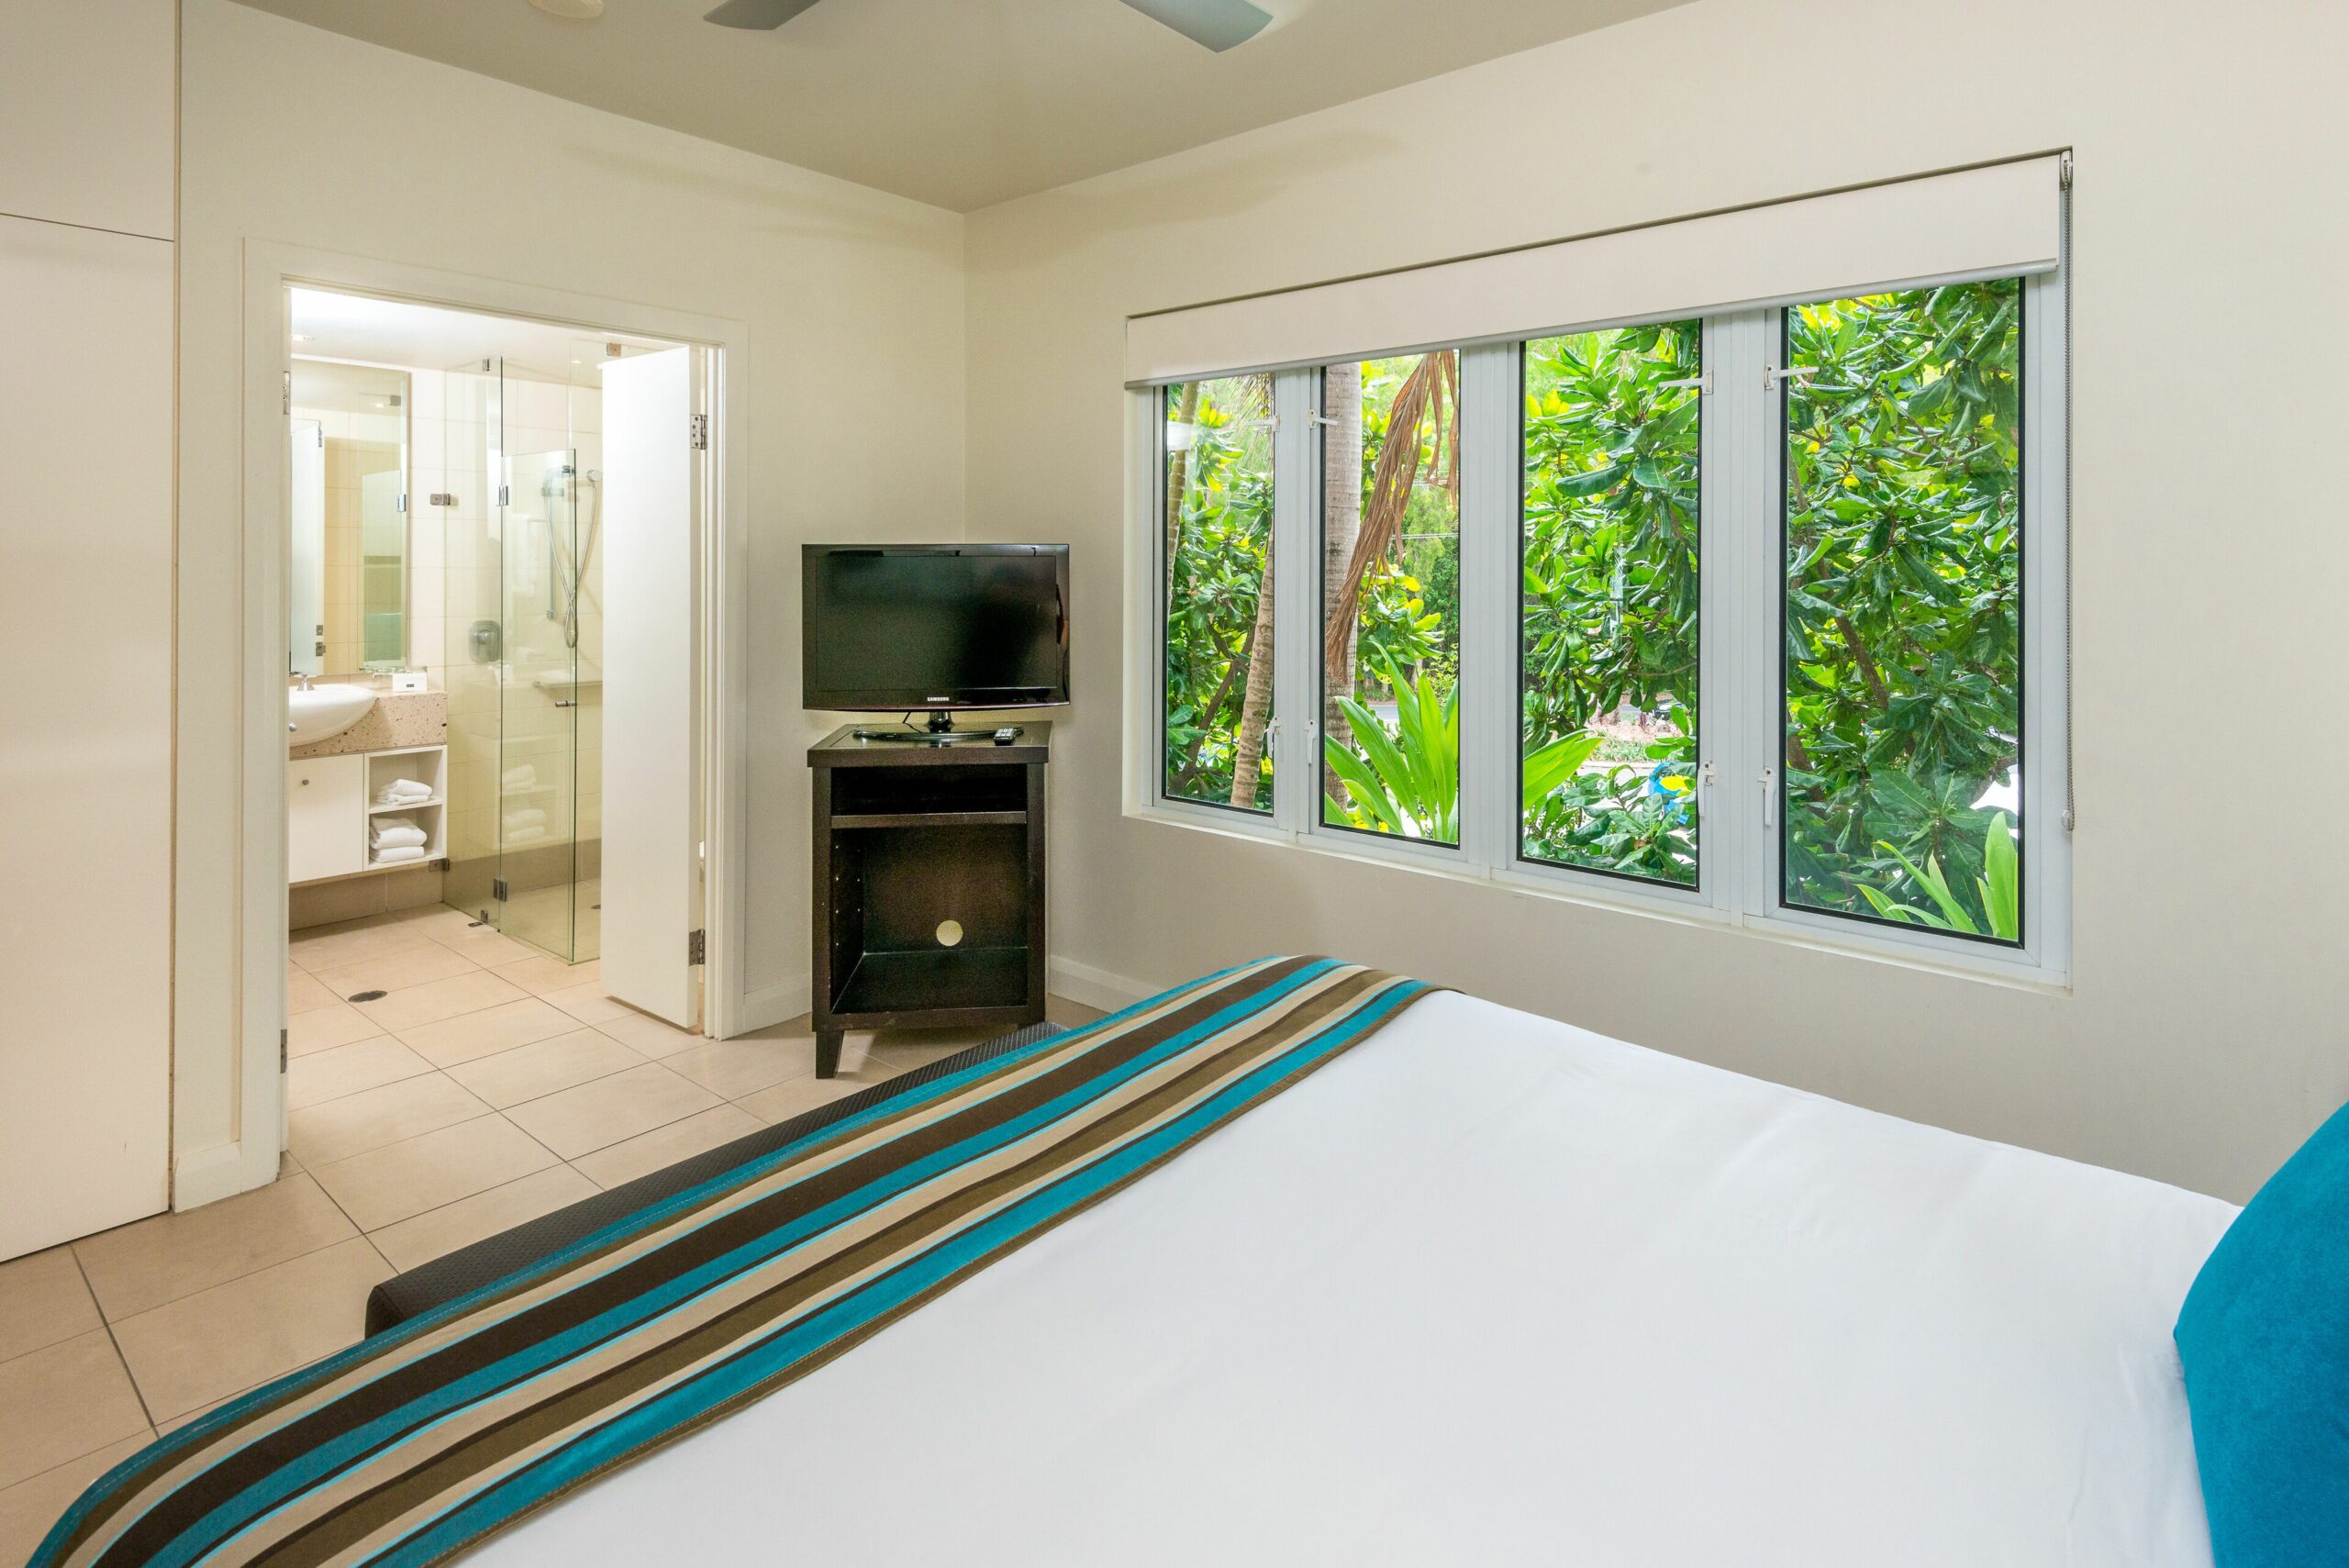 5322 One Bedroom Suite @ The Beach Club